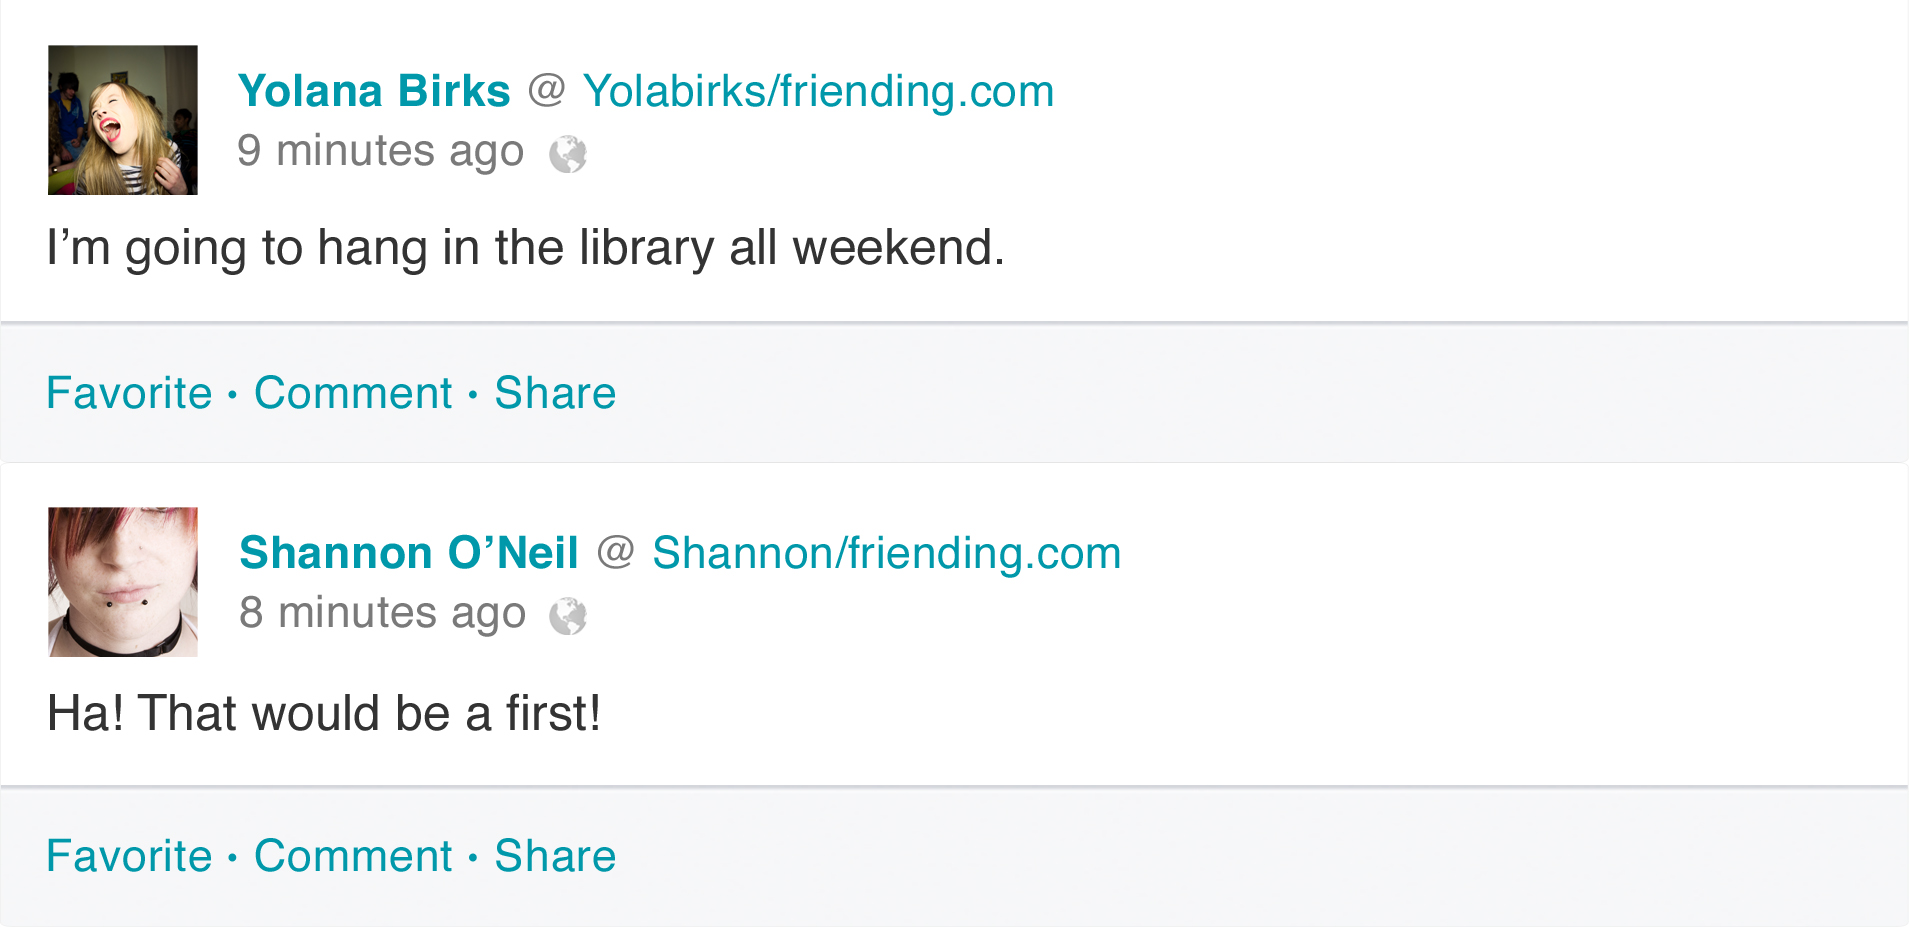 Photo shows the social media page of Yolana Birks who posts “I’m going to hang in the library all weekend.” One of her friends comments, “Ha! That would be a first!” This proves that data from social media may provide a better indication of personality than a personality test. 